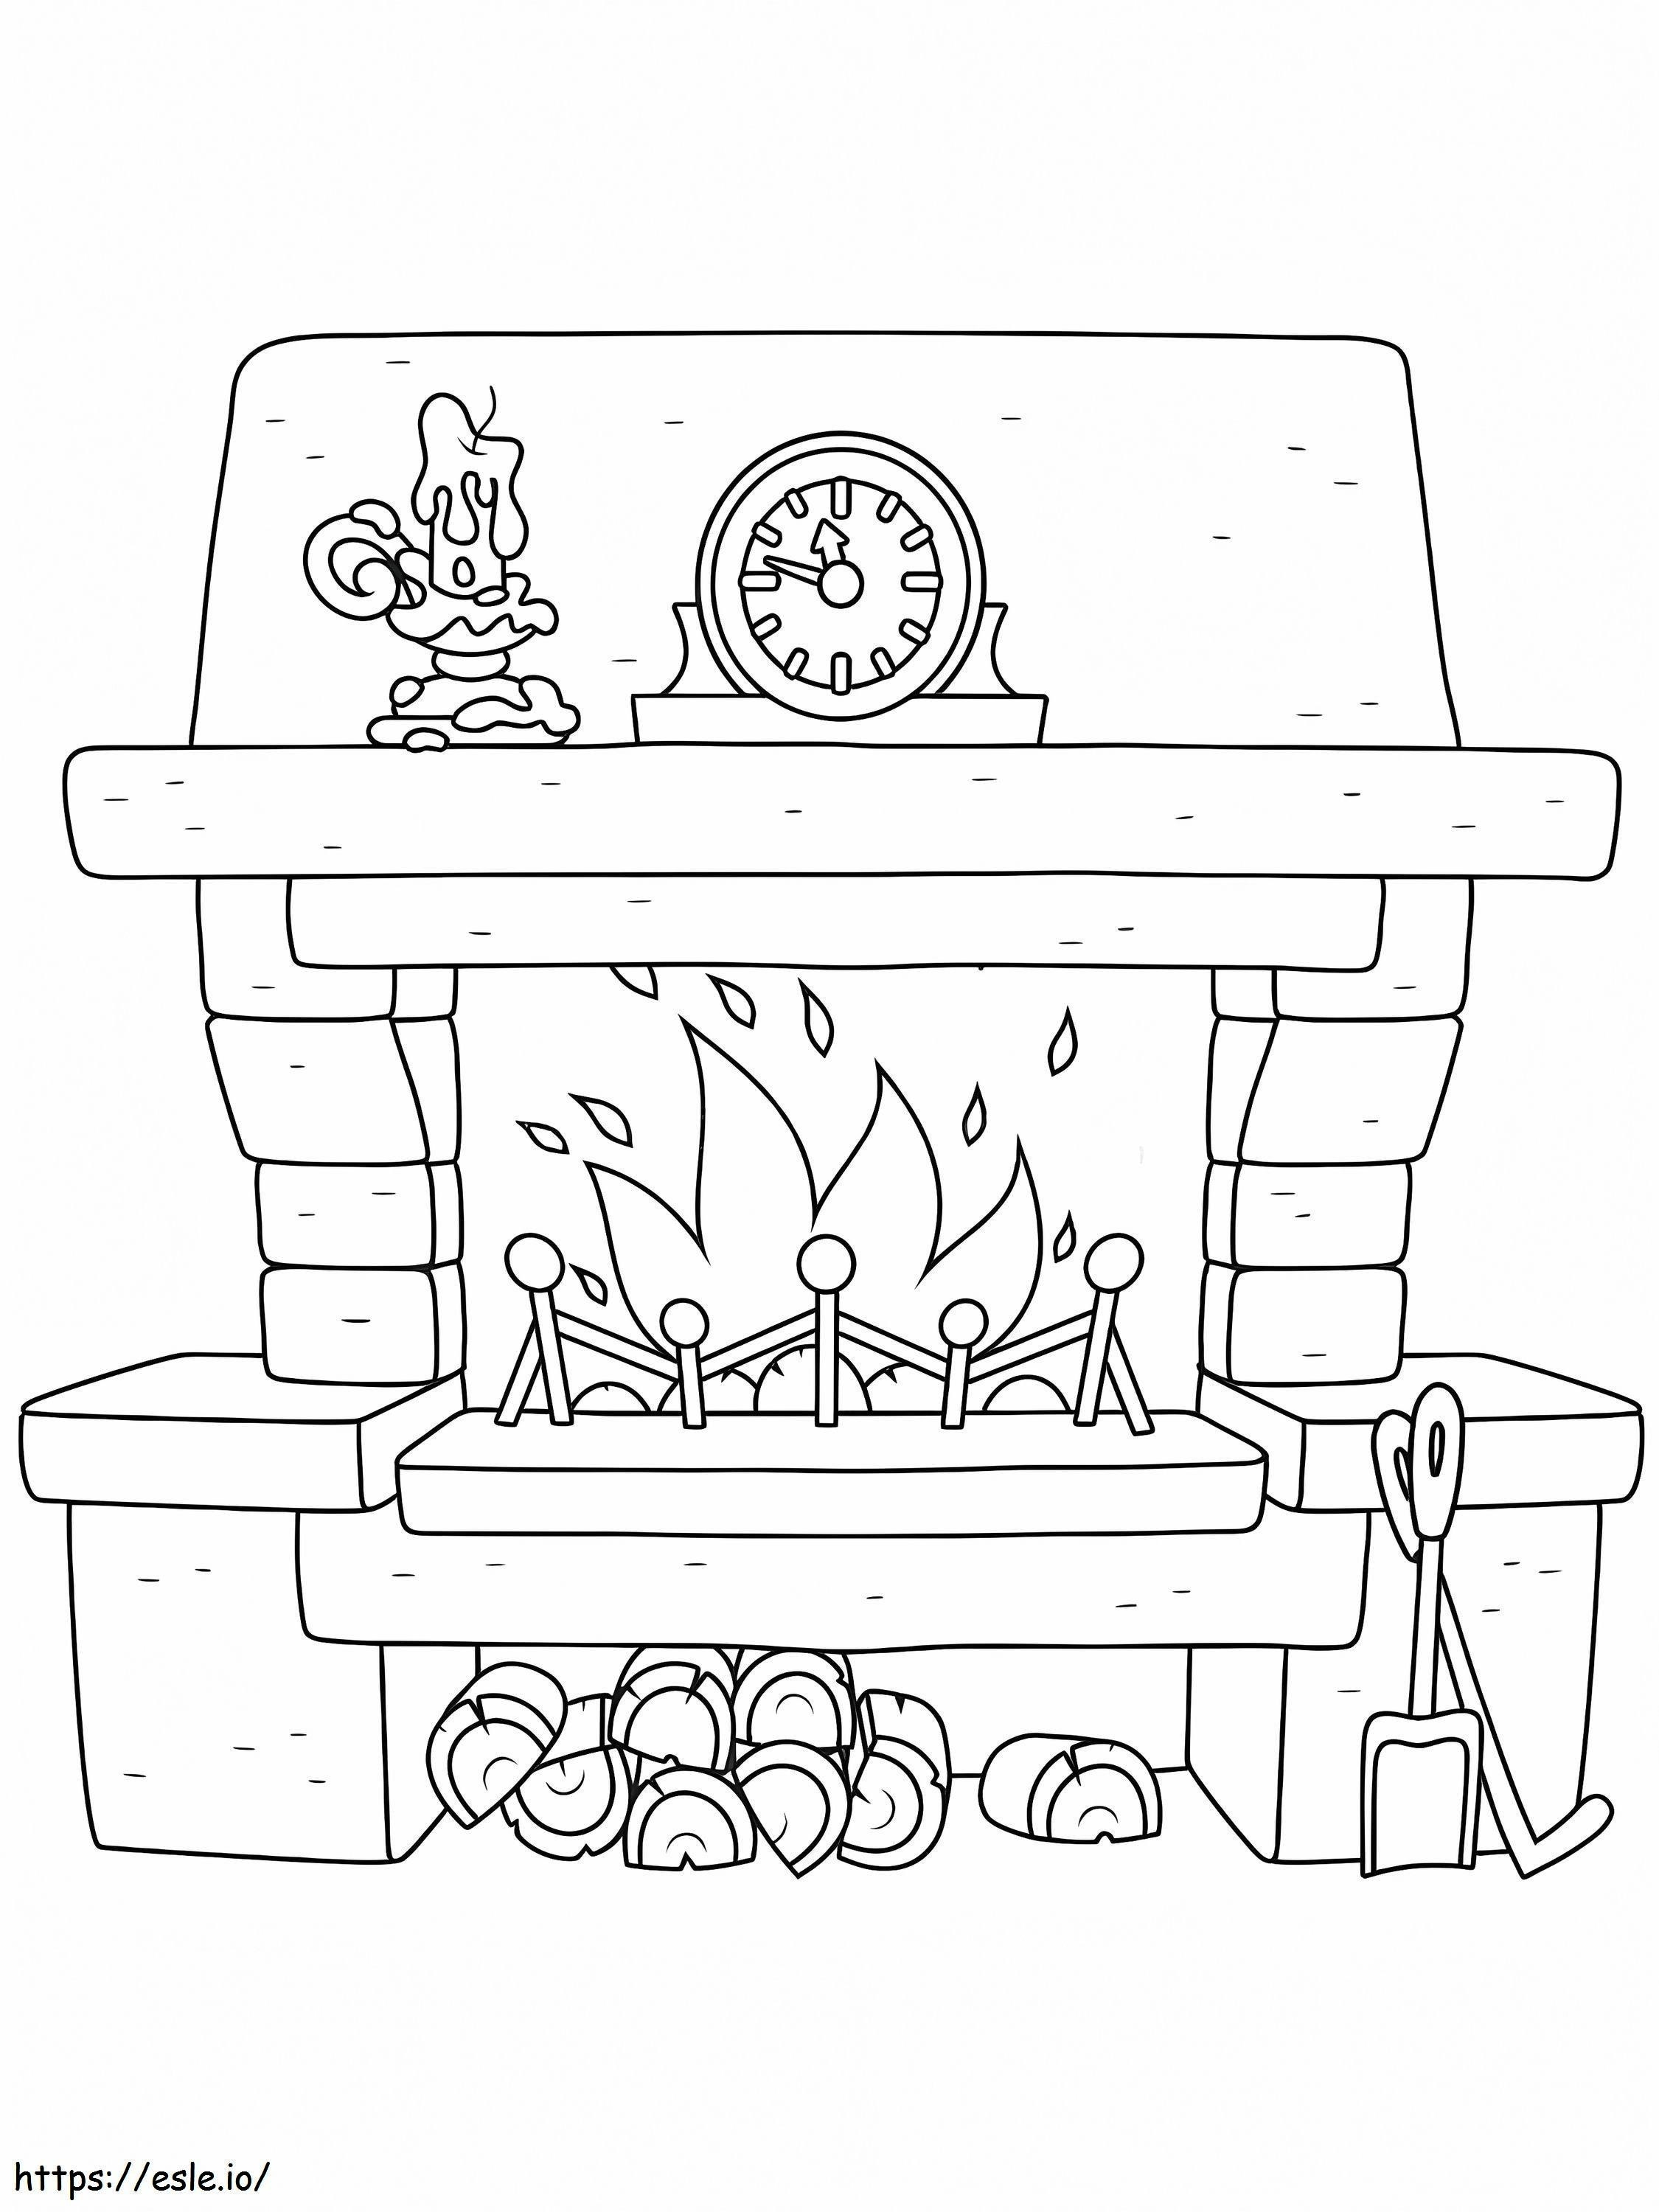 Fireplace 1 coloring page